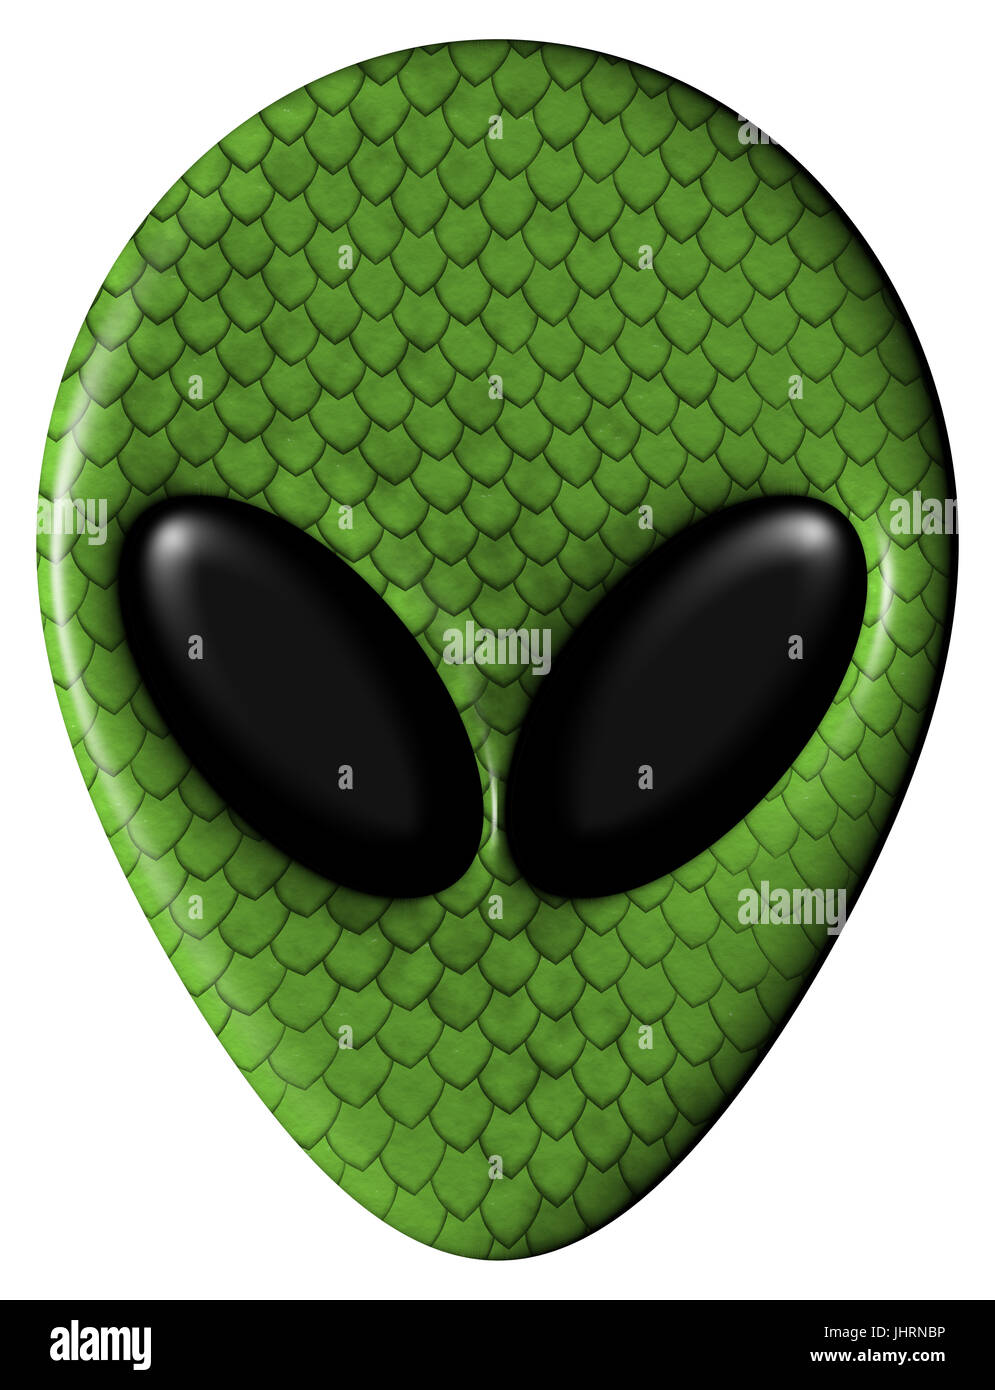 Alien face 3D illustration with green scaled skin Stock Photo